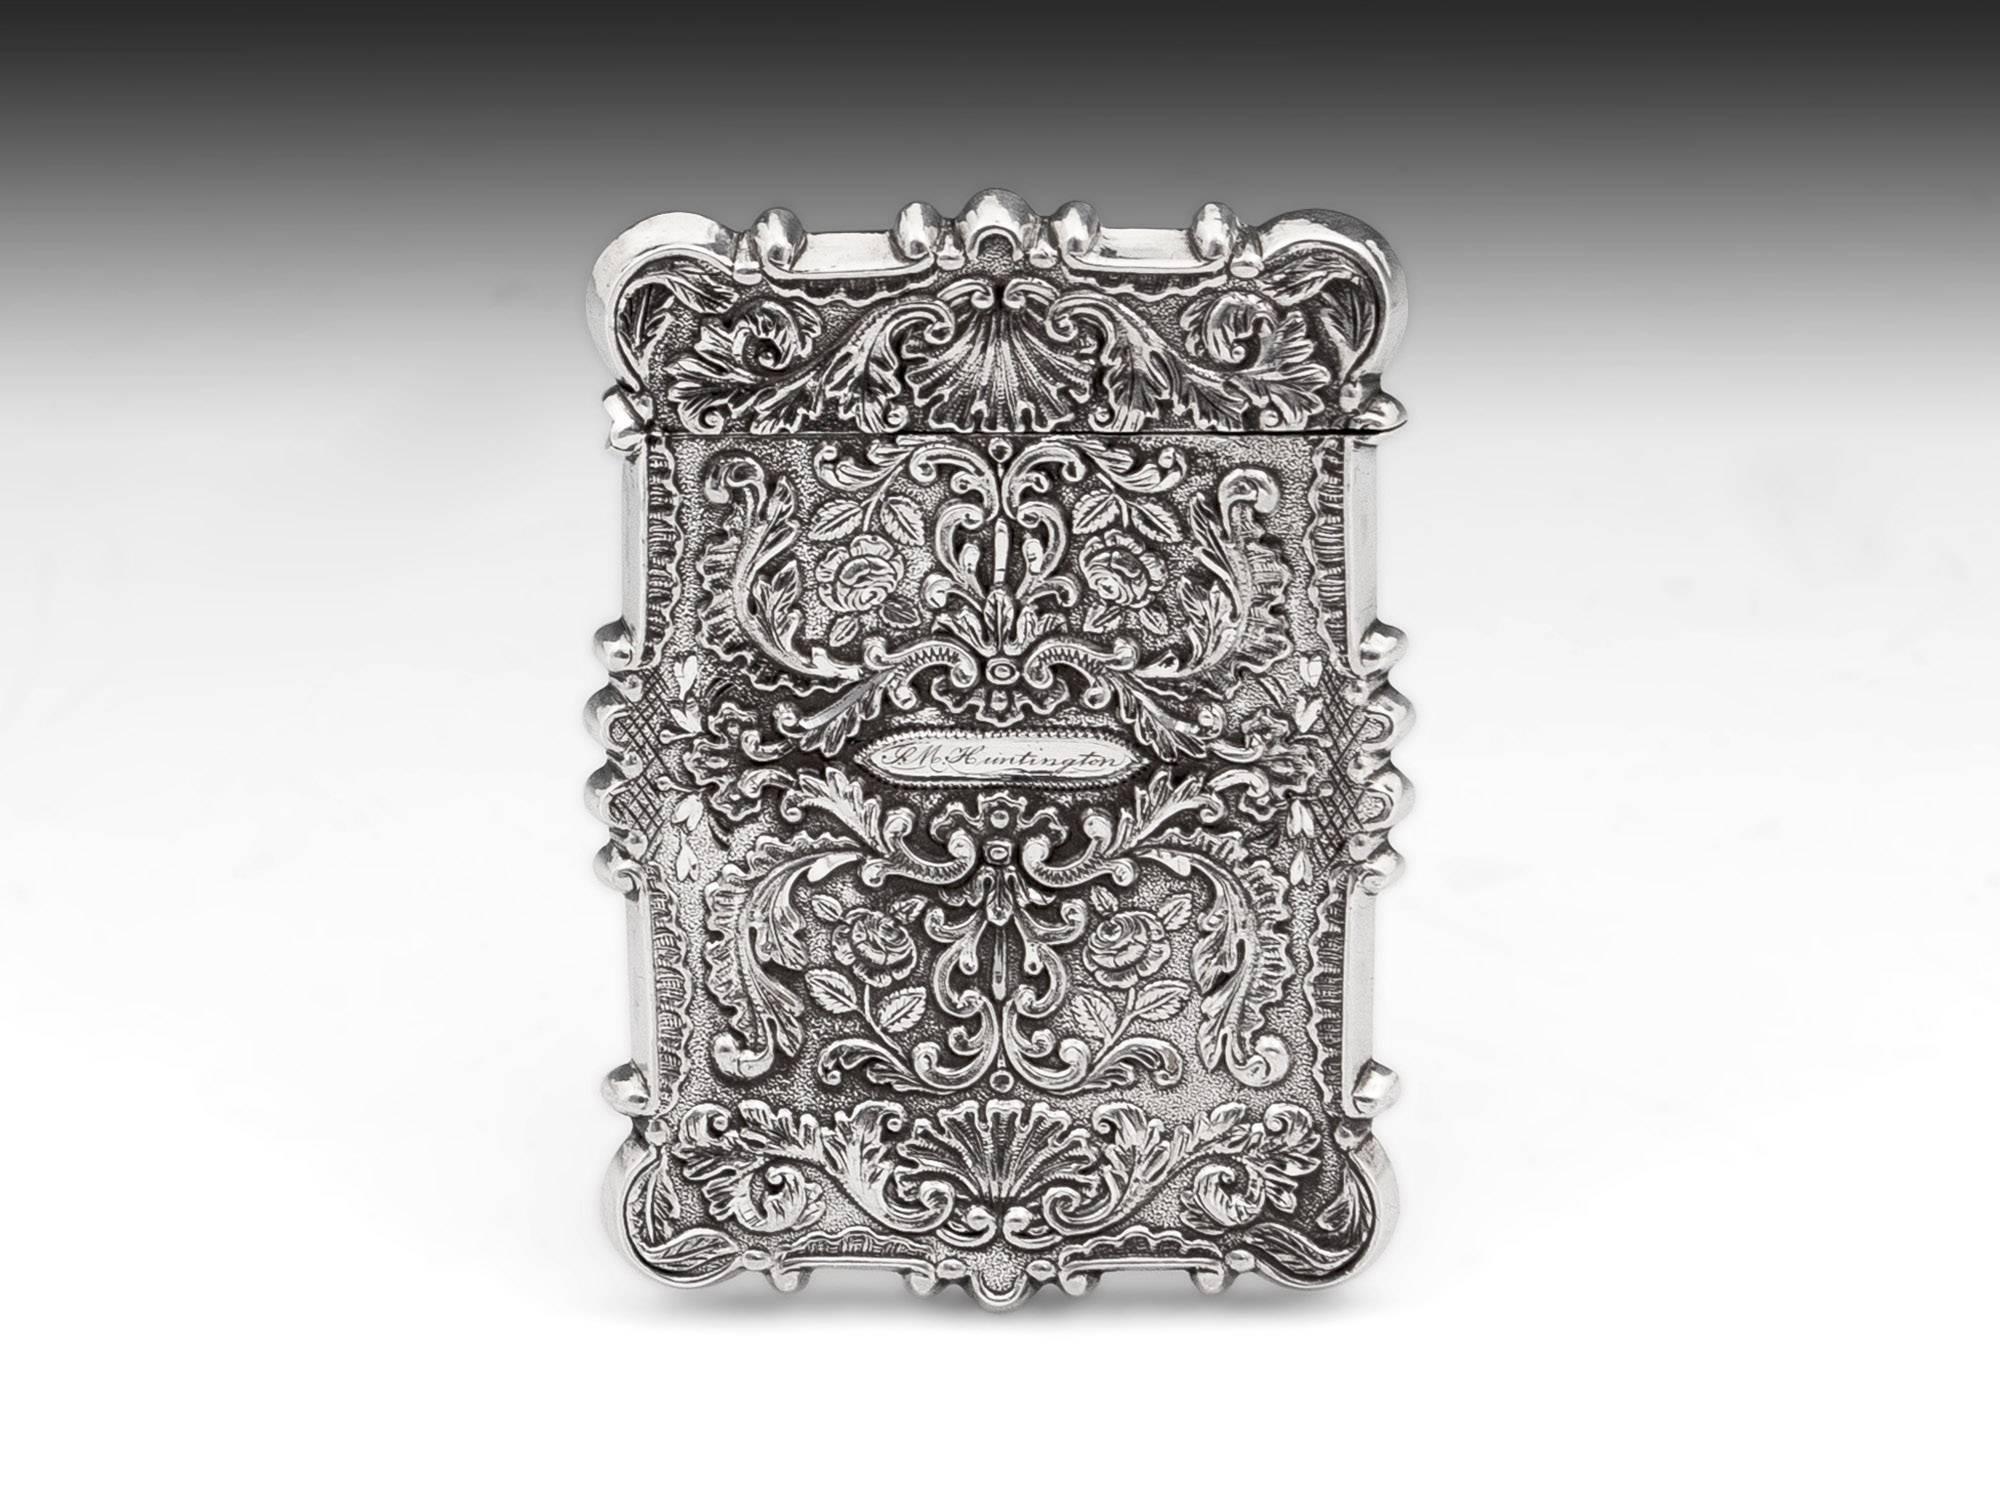 Silver card case by American silversmith Leonard & Wilson. With an intricate quartered floral design on one side and a view of Trinity Church, Wall Street, New York. 

The American card case has a floral design surrounding a name plaque which is